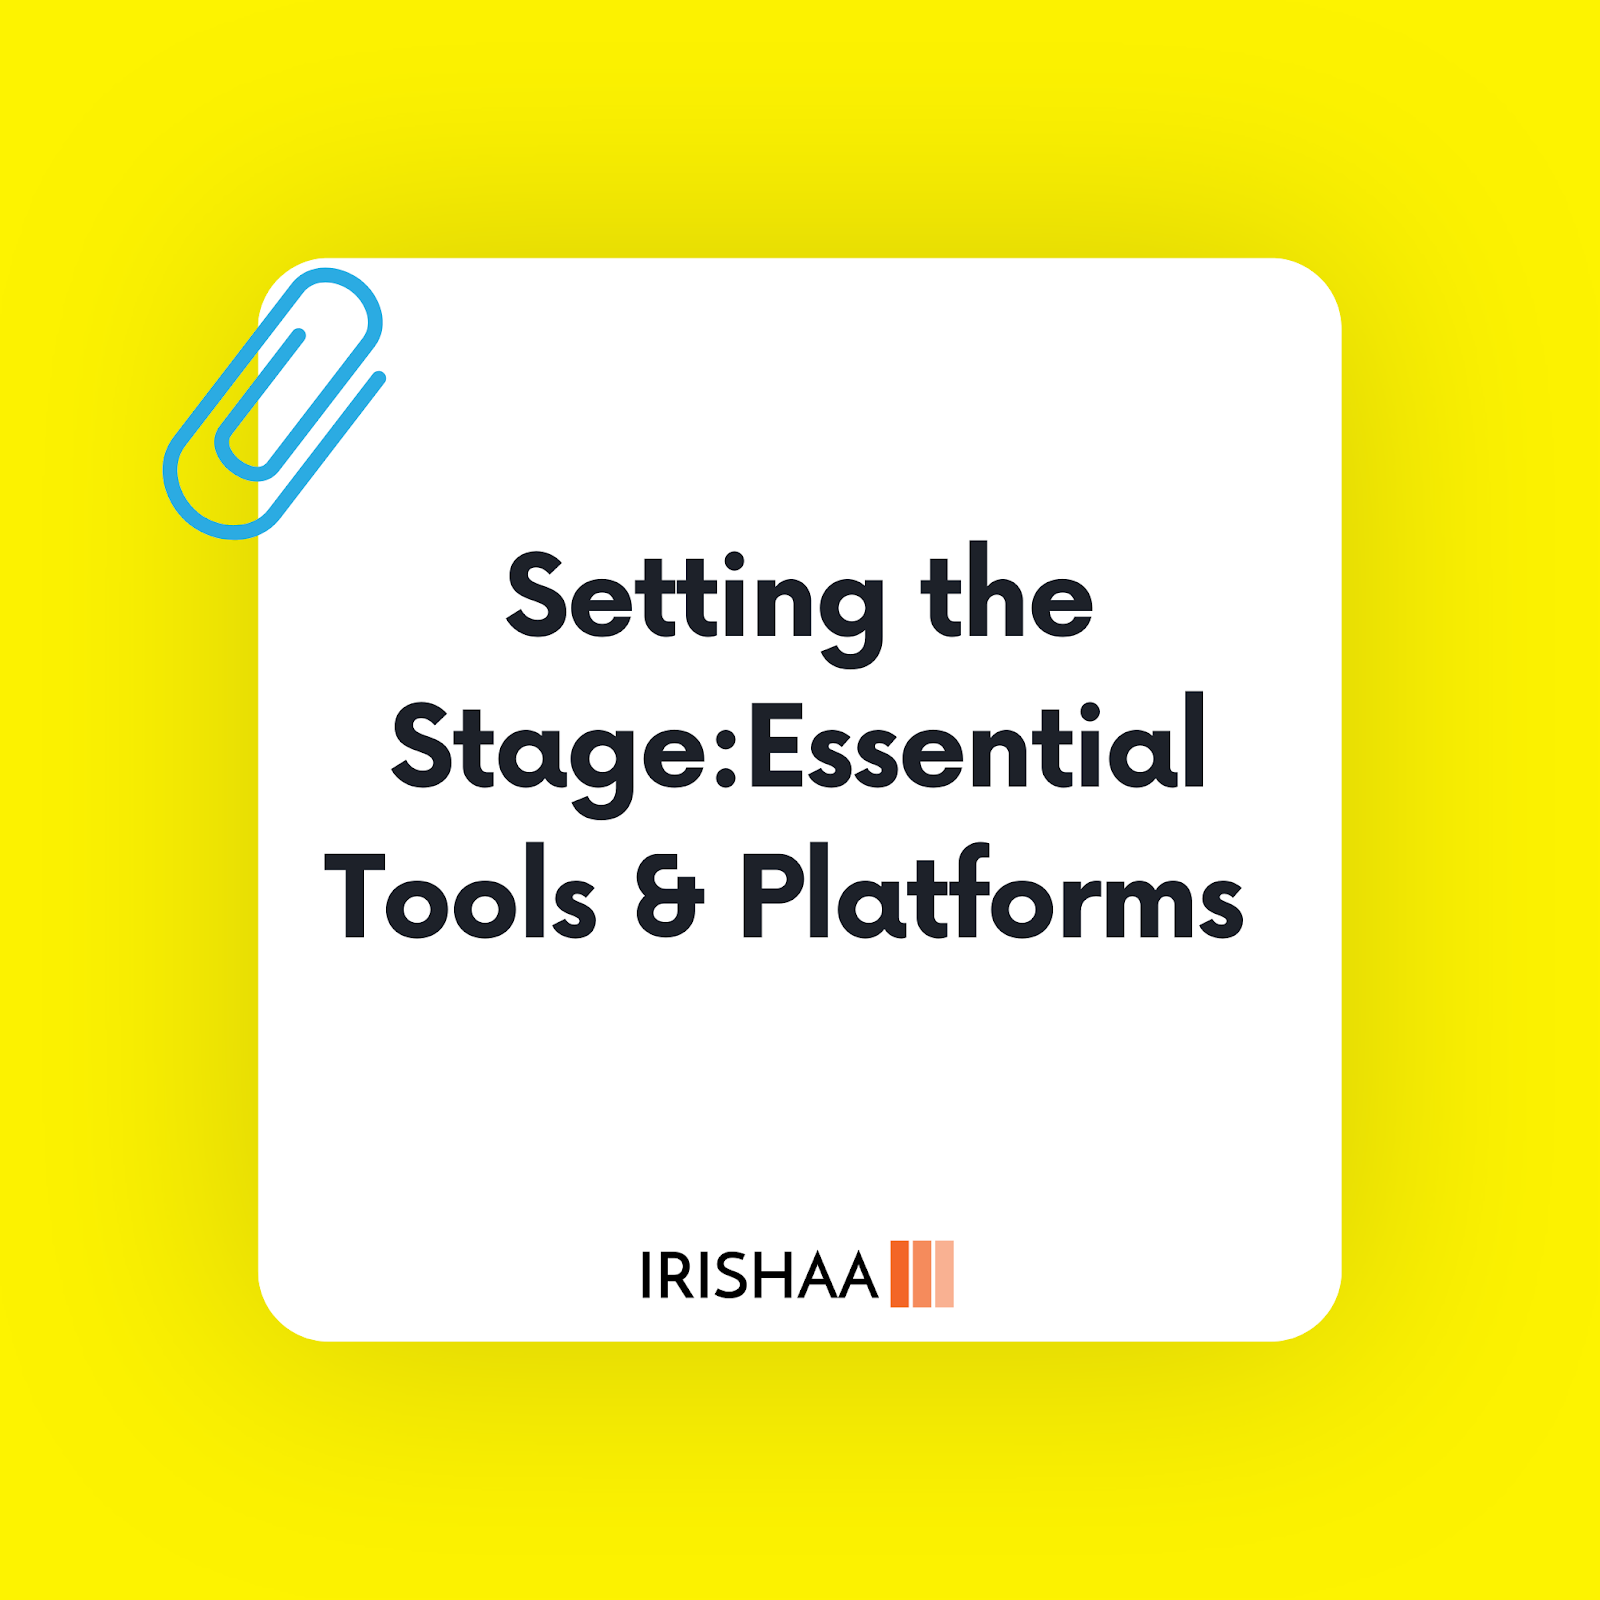 Setting the Stage: Essential Tools & Platforms 

